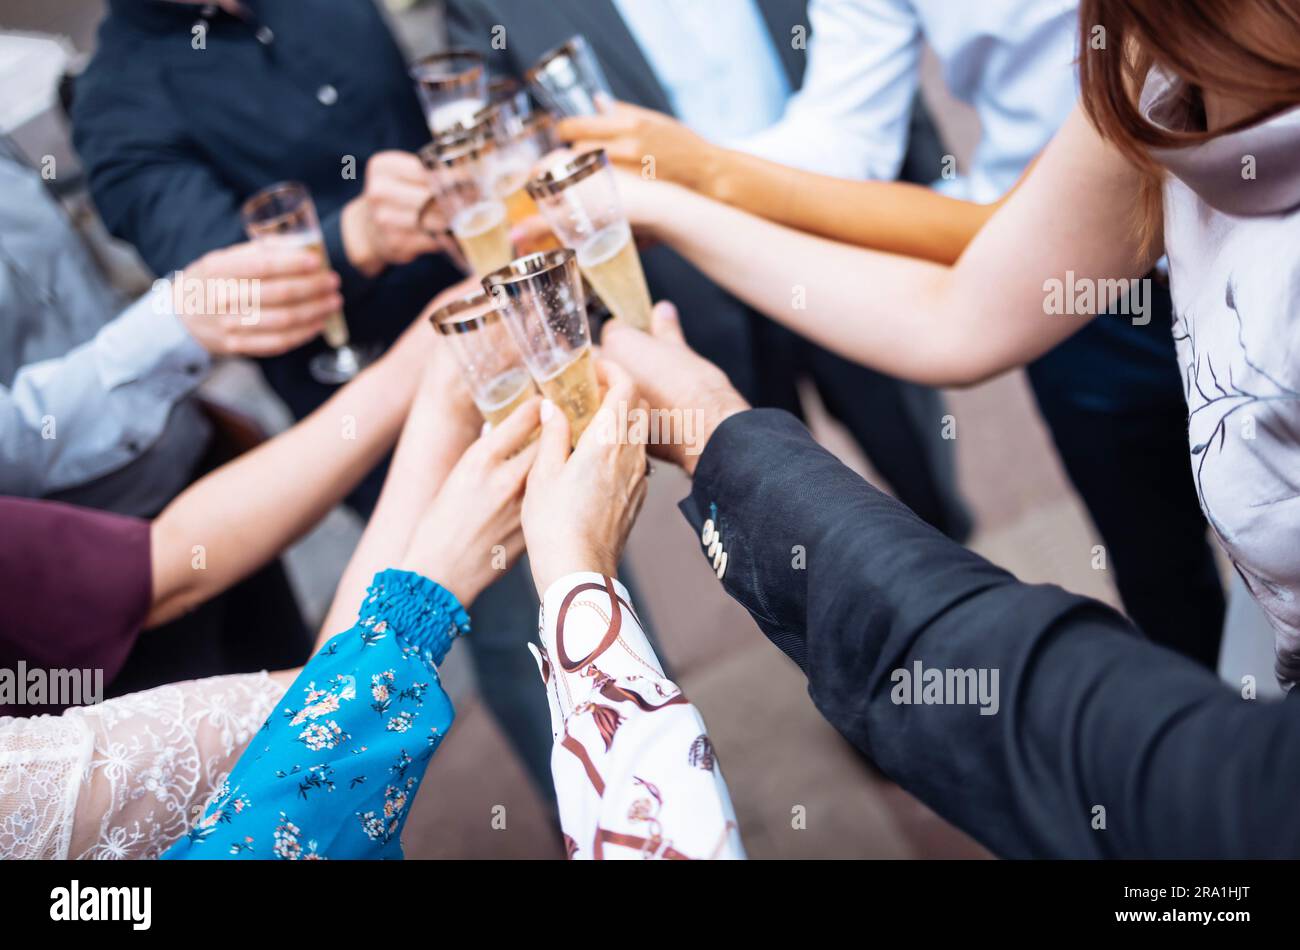 Female And Male Hands Holding Elegant Long Stemmed Glasses Of Champagne And Clink Them Making